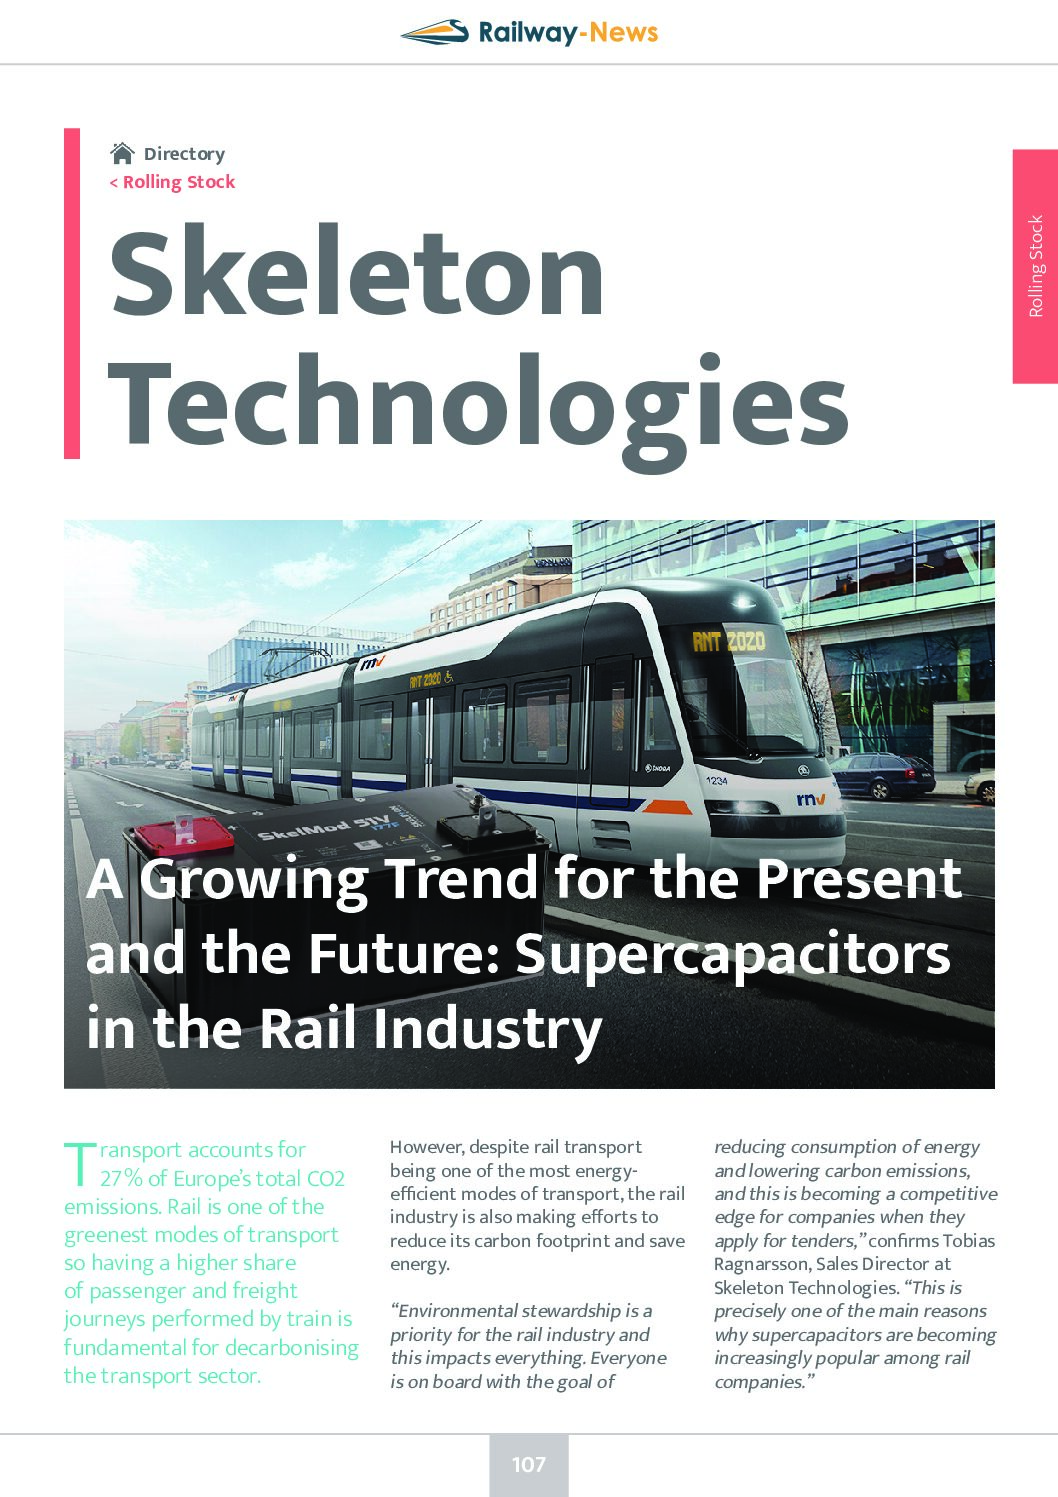 Skeleton Technologies – Supercapacitors in the Rail Industry